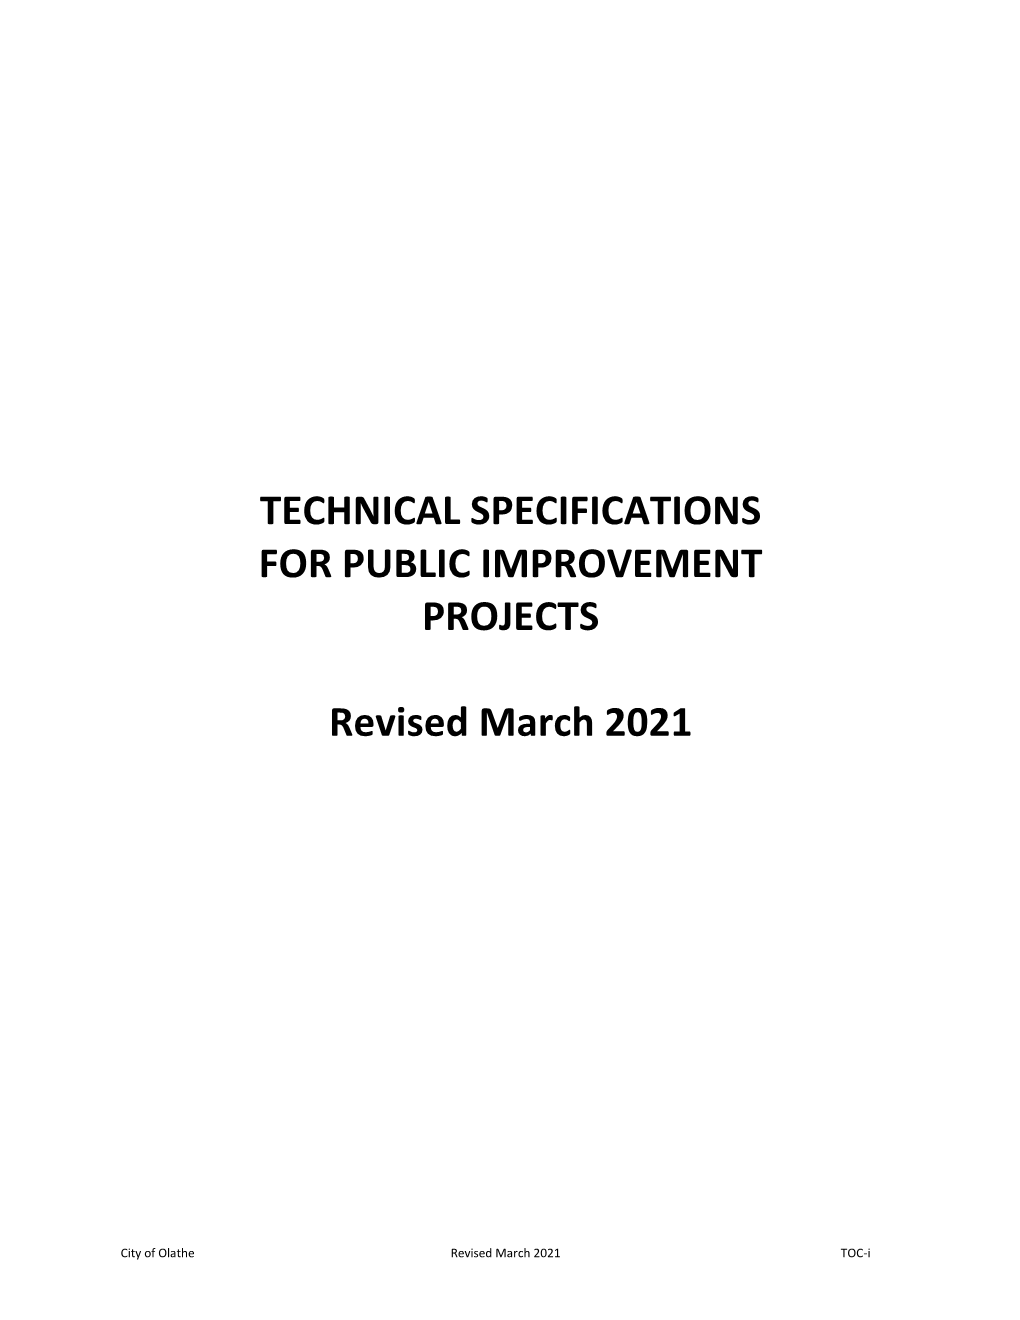 Technical Specifications for Public Improvement Projects